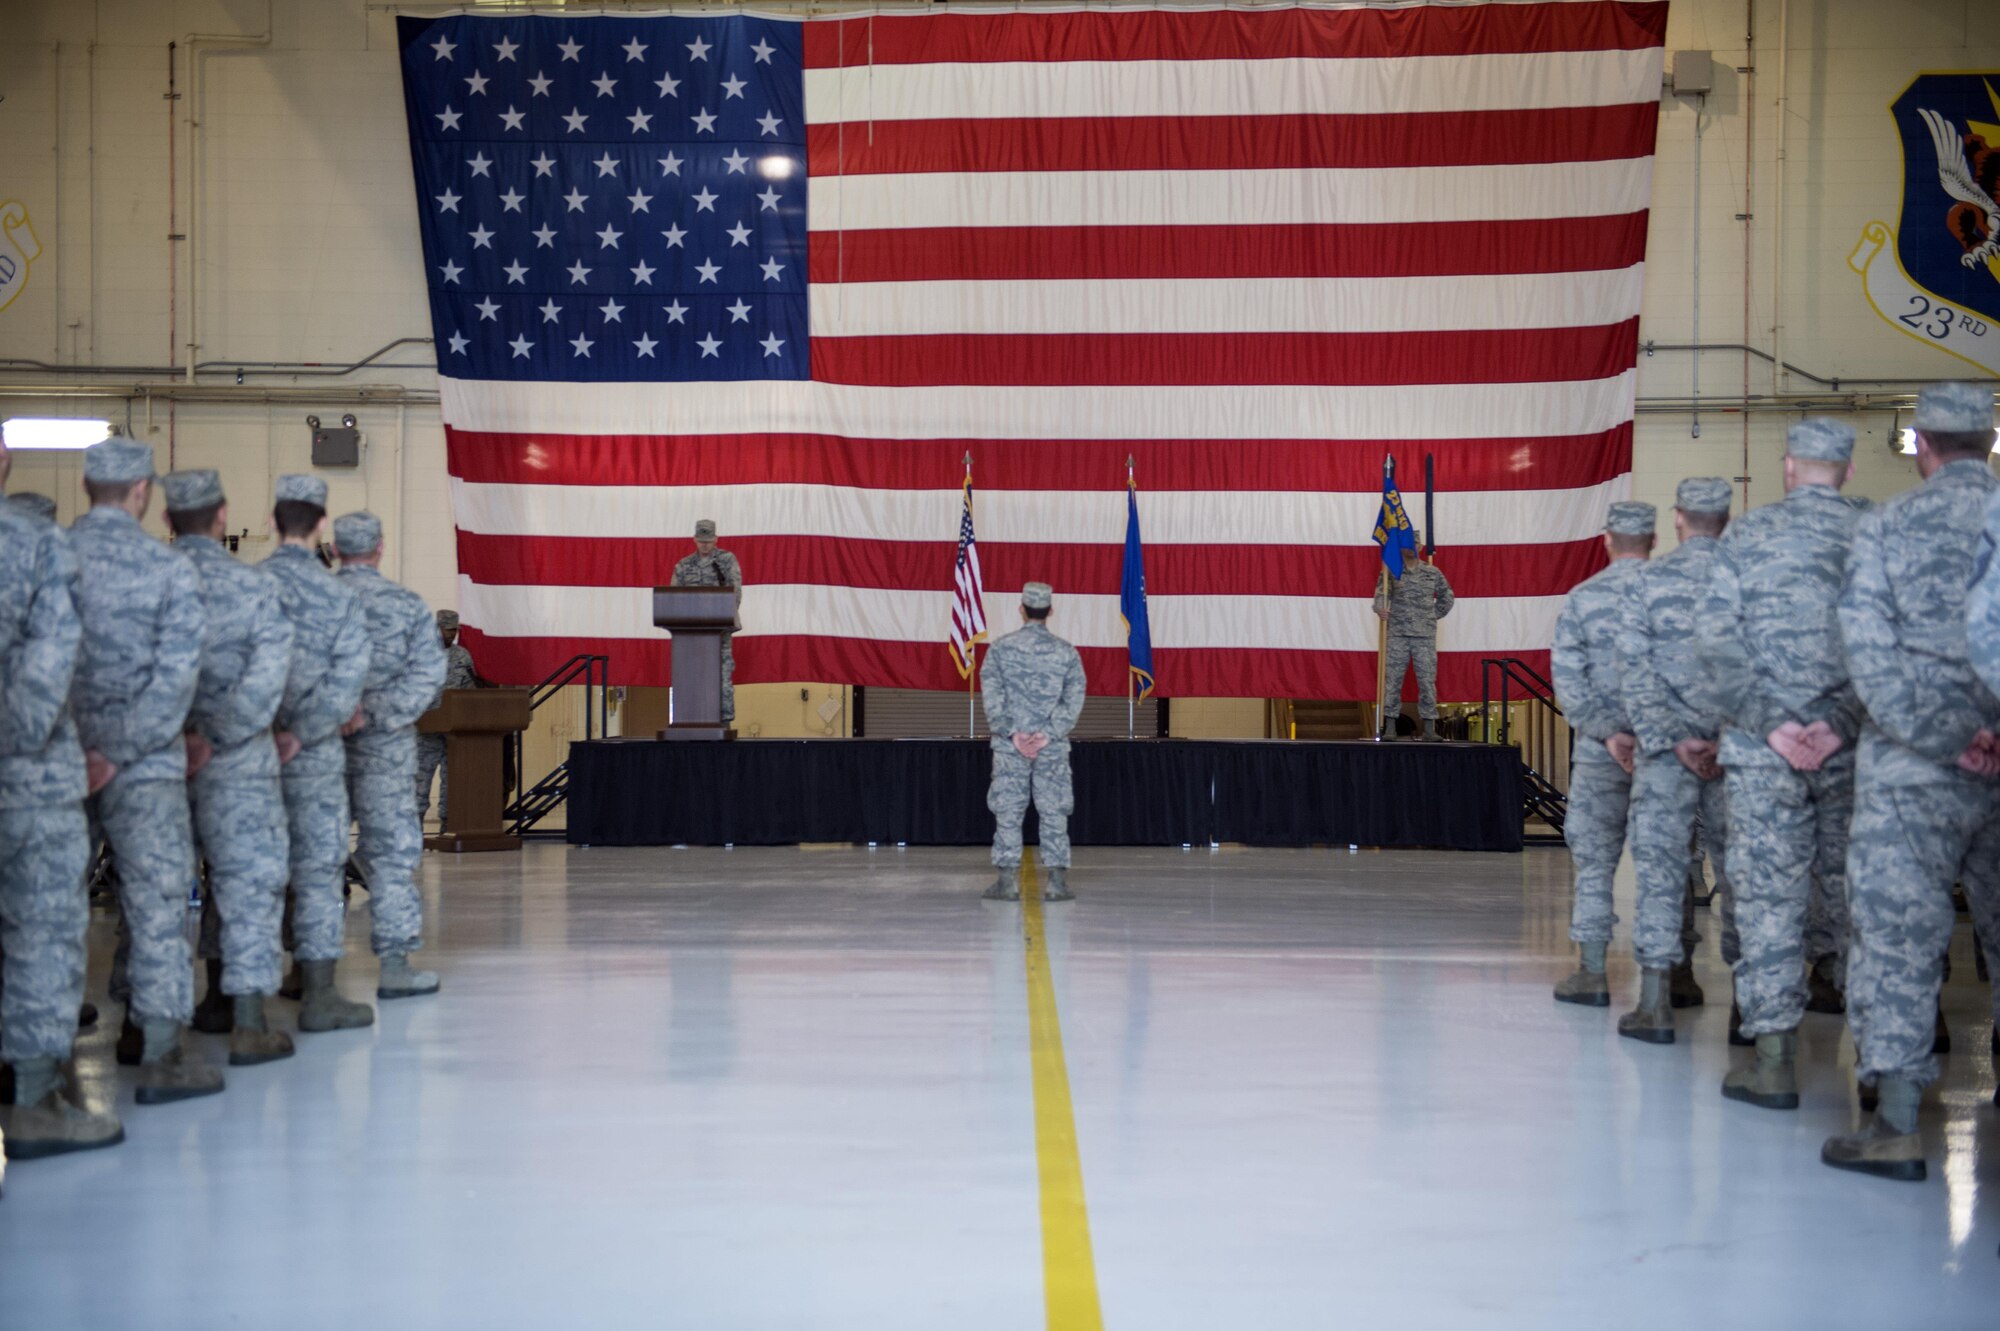 Lt. Col. Neal Van Houten, 23d Maintenance Squadron commander, commends the men and women of the newly re-designated MXS during a ceremony, Nov. 9, 2017, at Moody Air Force Base, Ga. Van Houten took command of Air Combat Command’s second largest squadron, leading the 800 men and women who are responsible for executing safe and reliable maintenance on aircraft systems, ground equipment and munitions to support the 23d Wing's attack and rescue missions. (U.S. Air Force photo by Senior Airman Greg Nash)